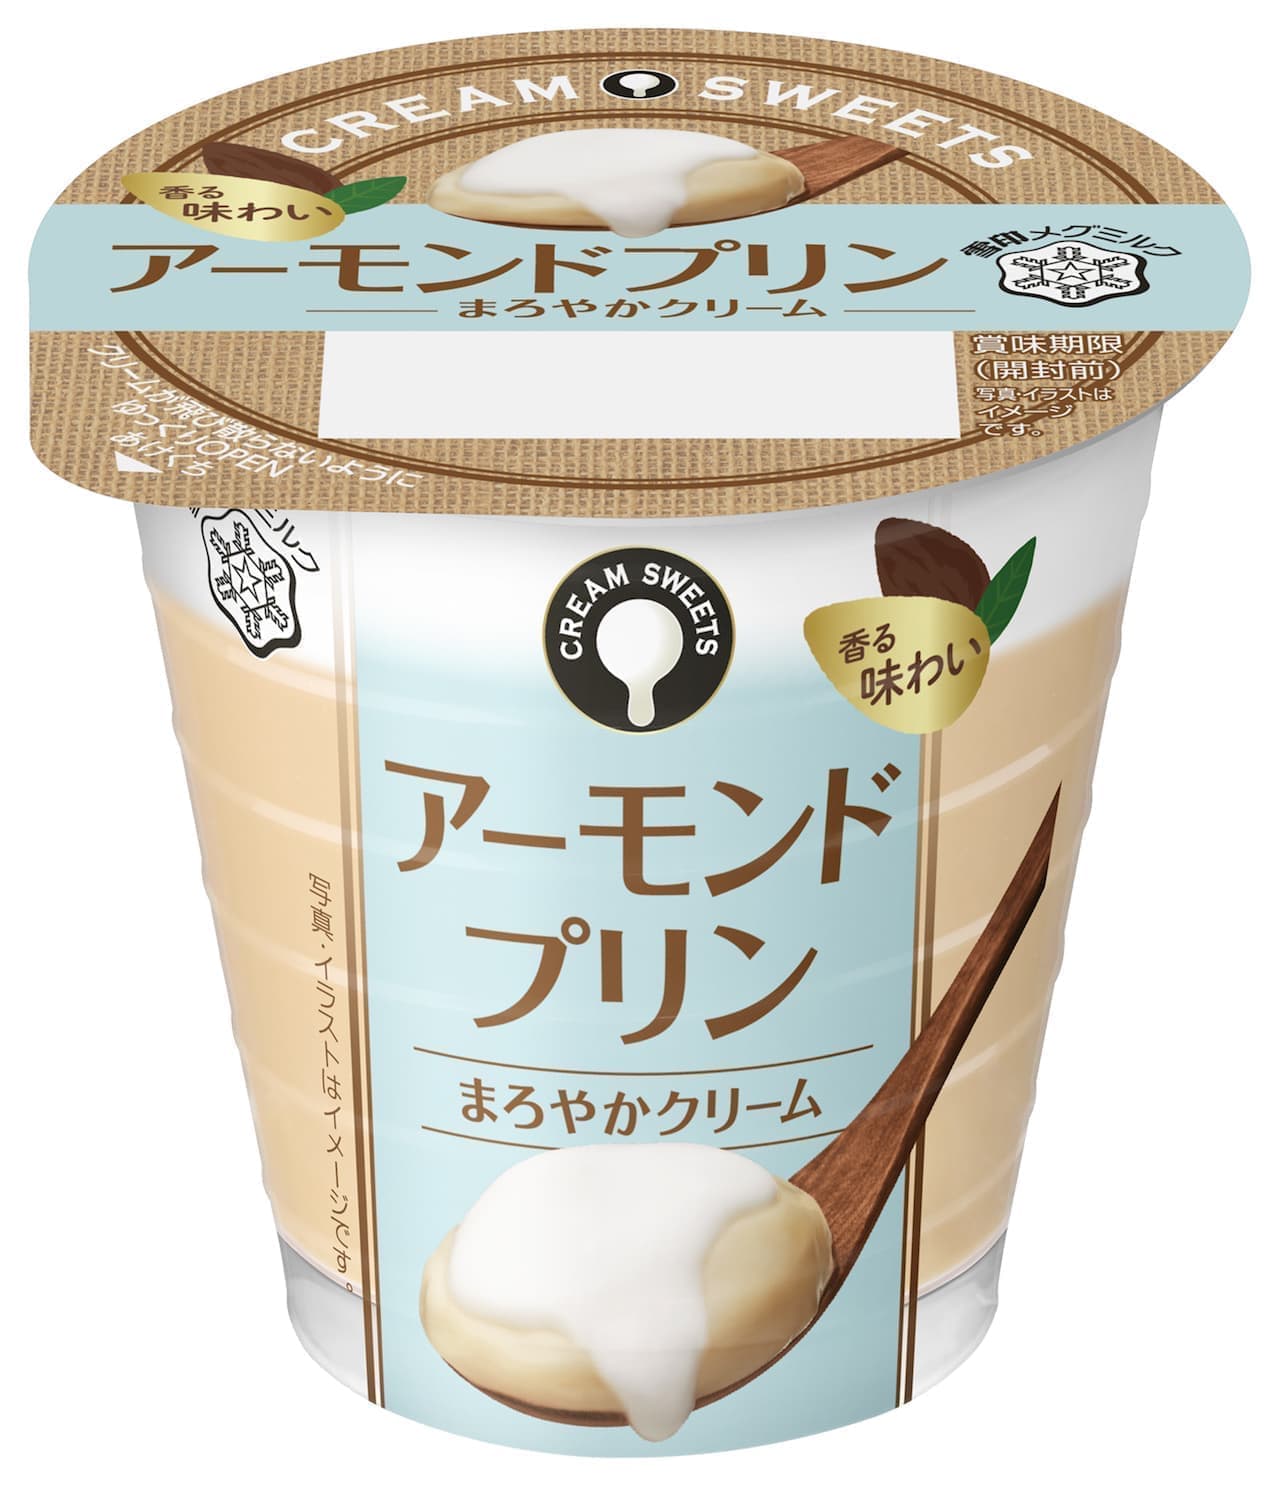 Limited time offer "CREAM SWEETS almond pudding"